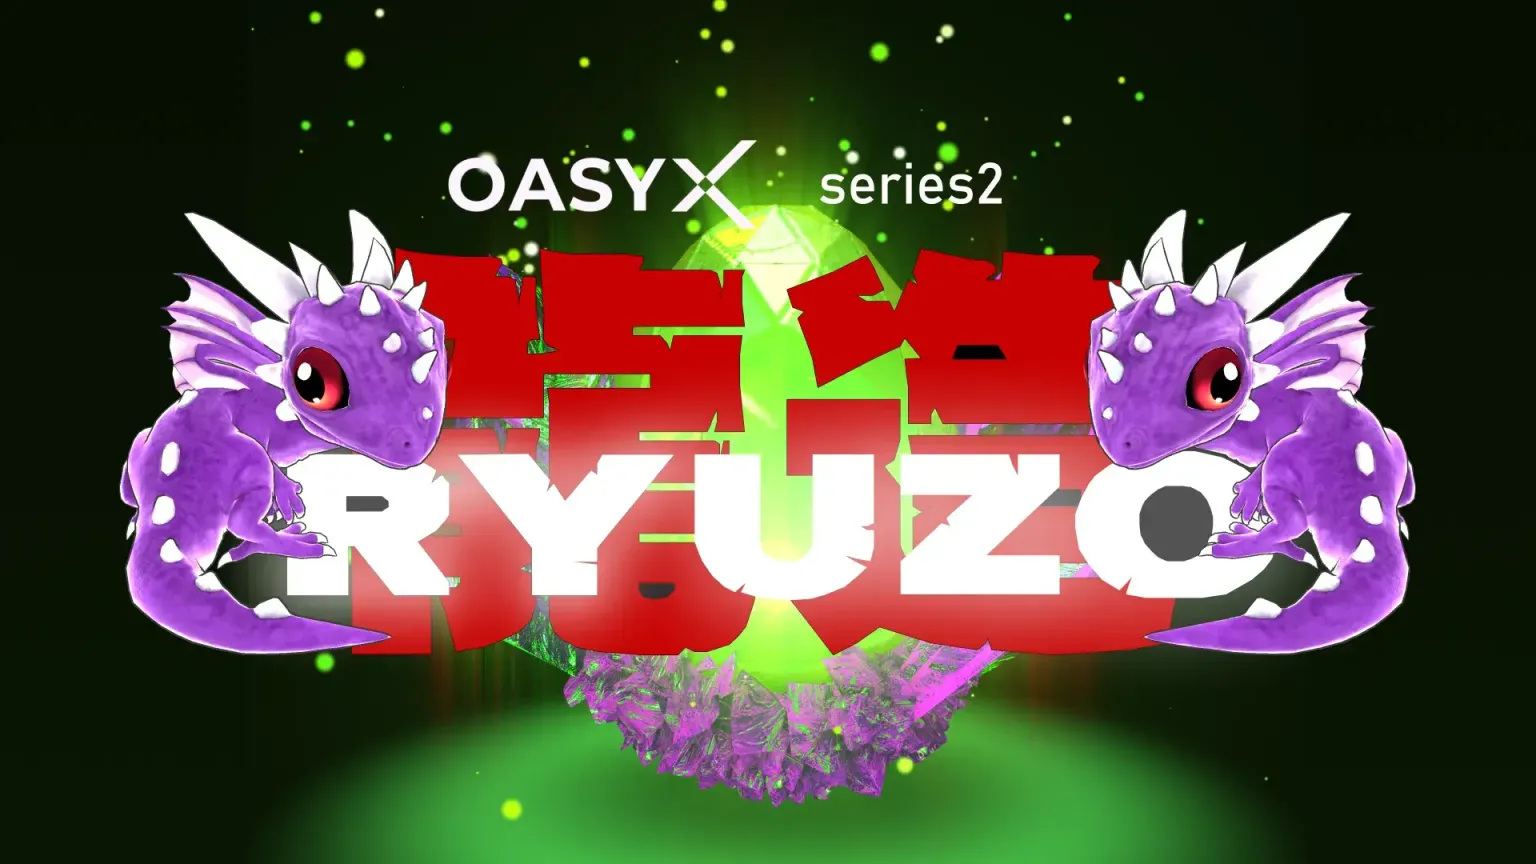 Ryuzo is an NFT-driven game on Oasys co-developed by Bandai Namco Research. Image: Oasys